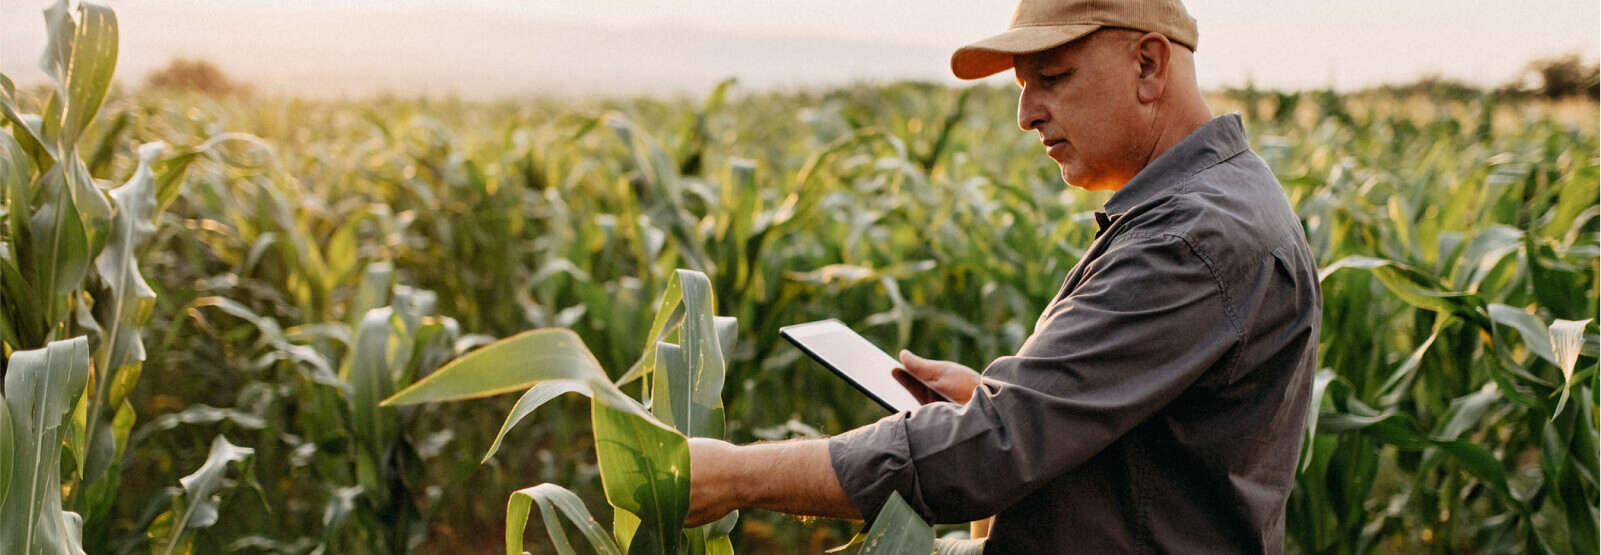 A farmer inspecting tall crops and holding a tablet